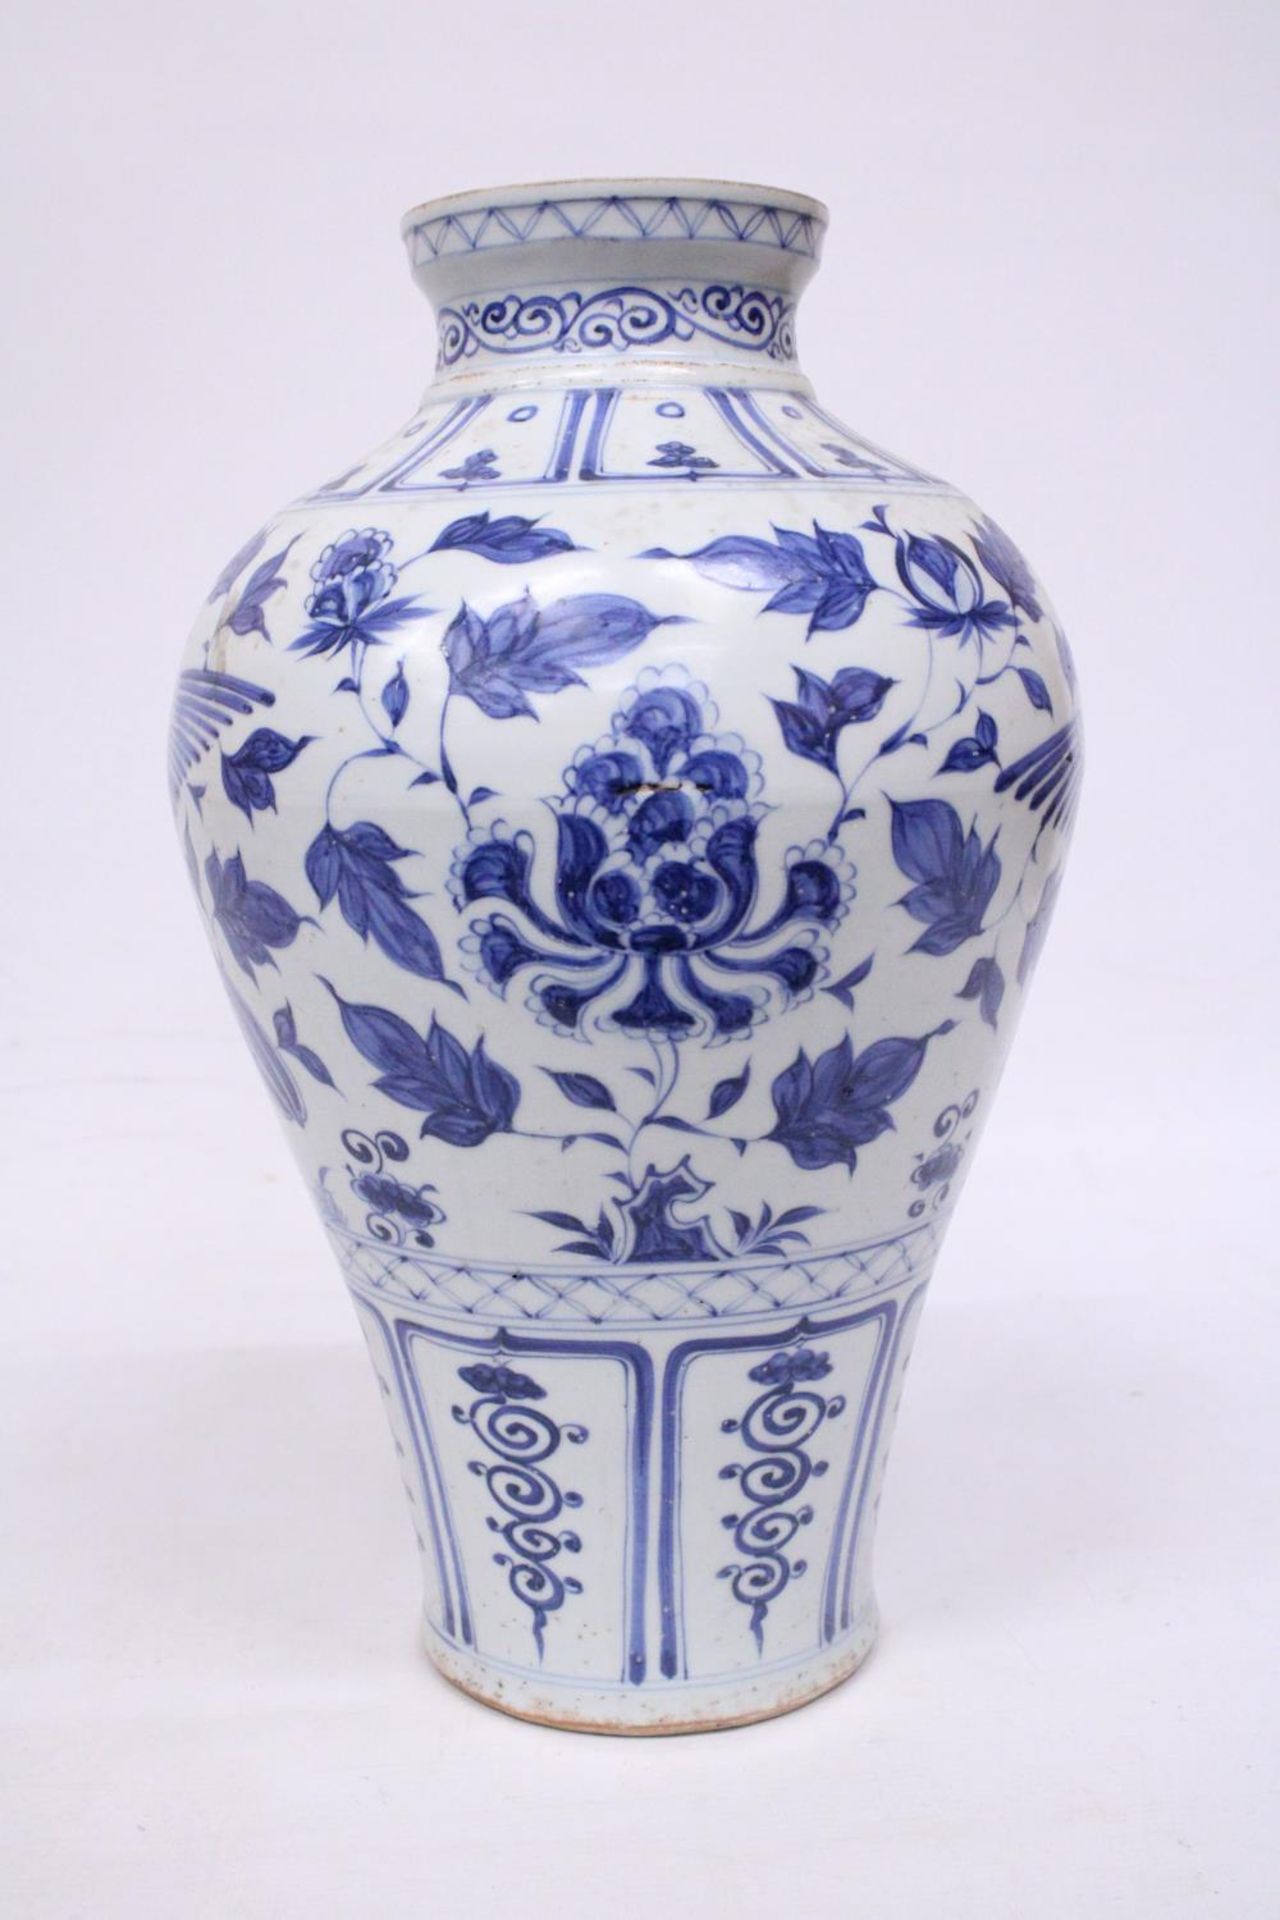 A LARGE CHINESE MING STYLE BLUE AND WHITE POTTERY MEIPING VASE DECORATED WITH CRANES IN FLIGHT - - Image 2 of 5